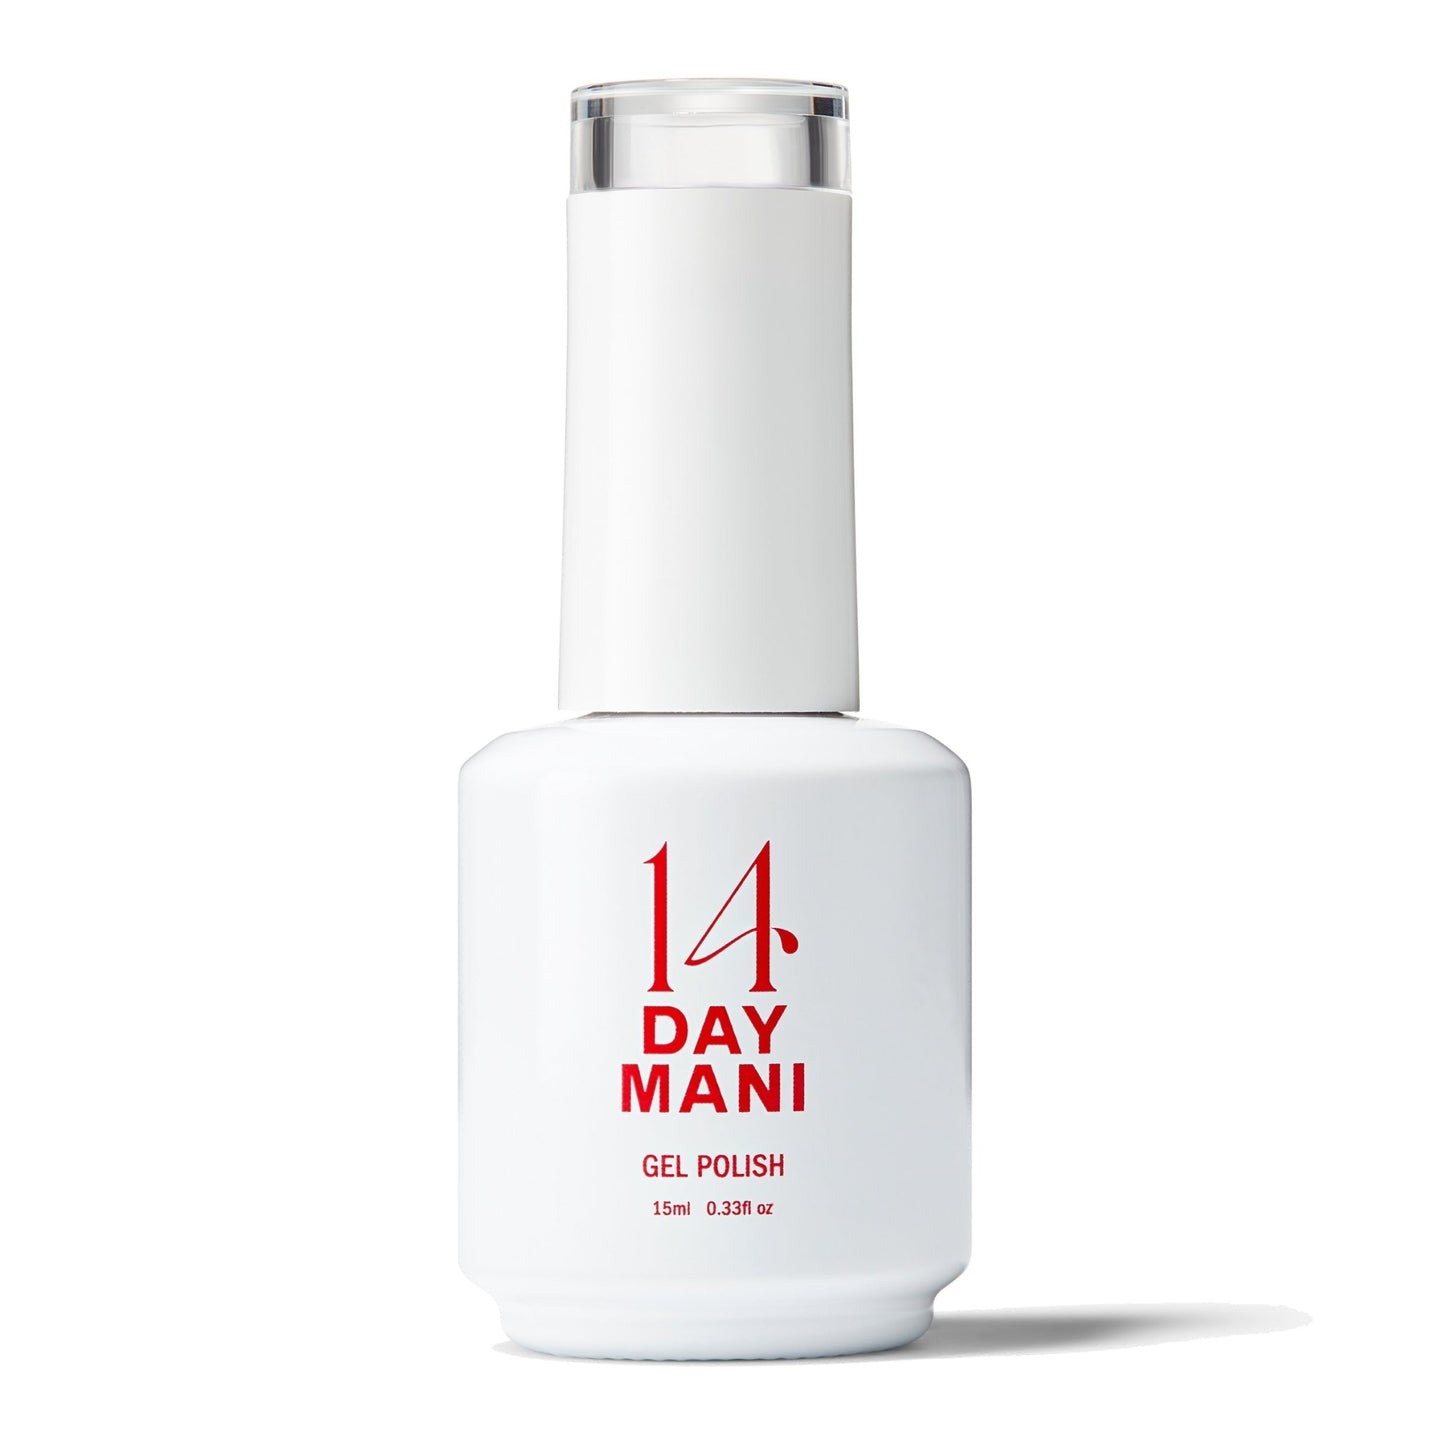 Queen of Everything - French White, Gel Polish - 14 Day Manicure - Bottle 